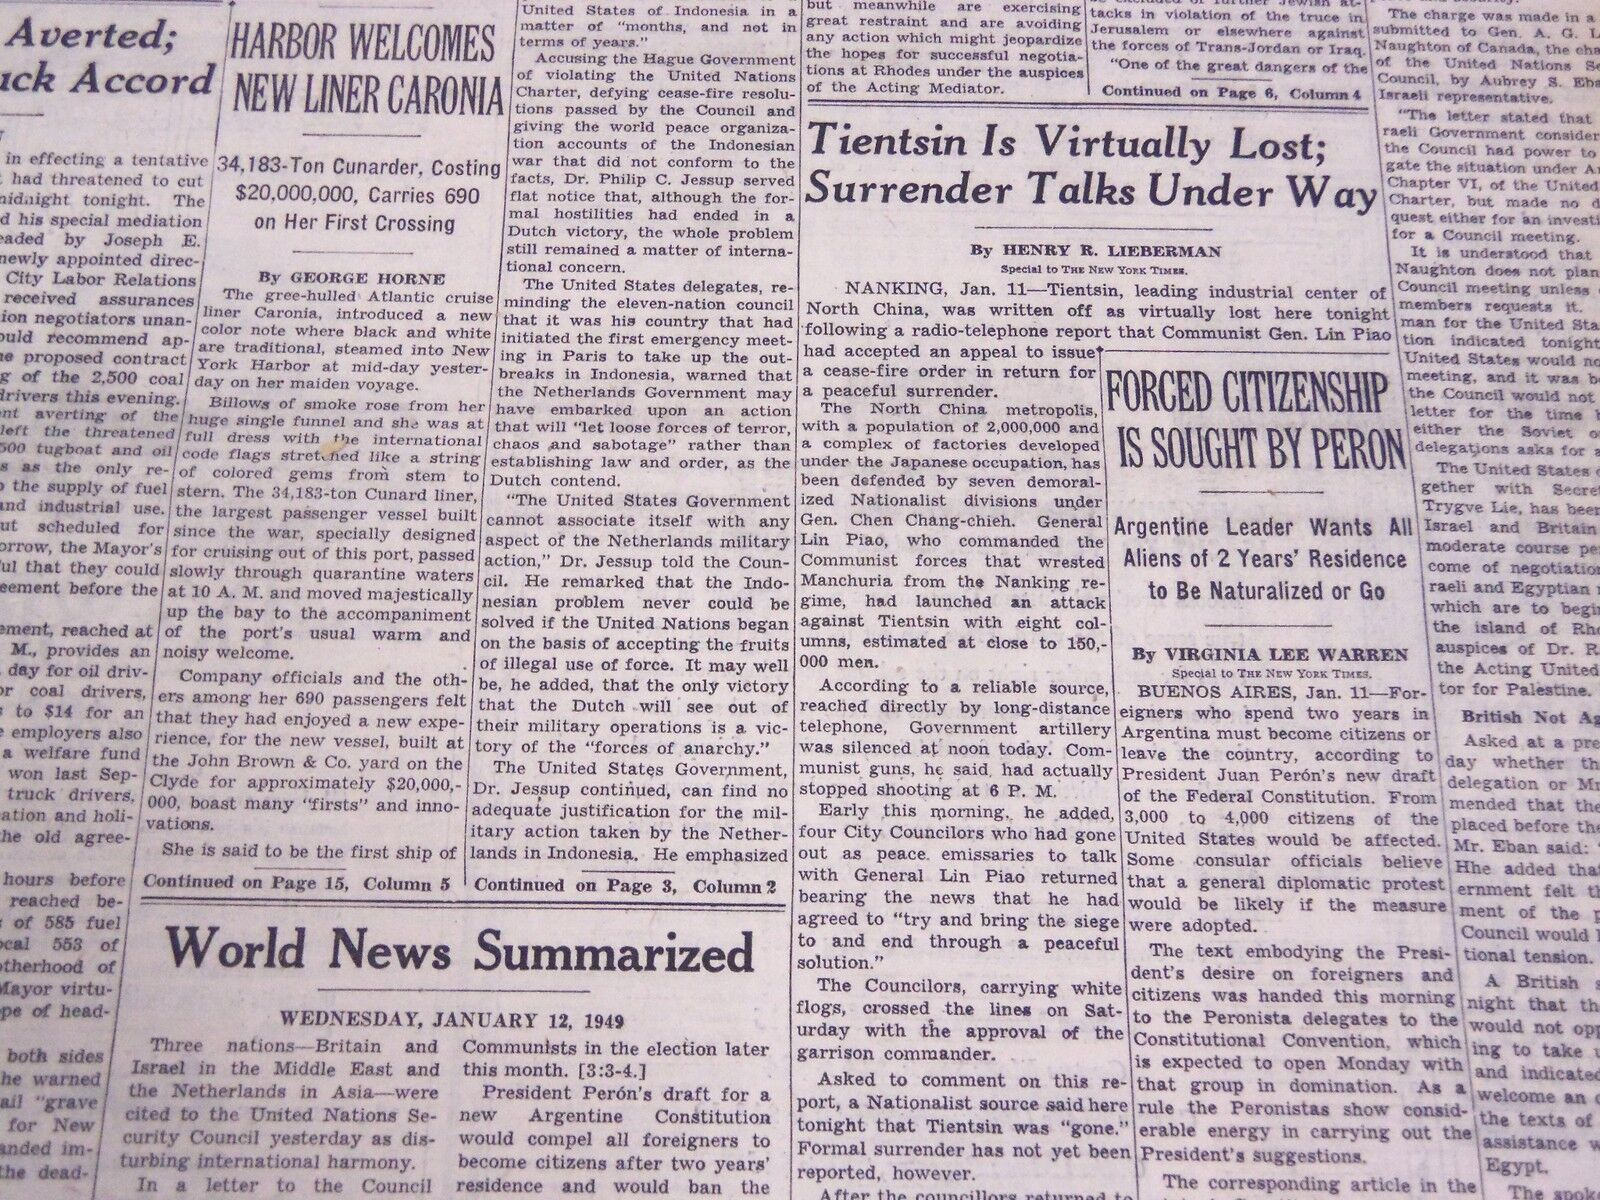 1949 JANUARY 21 NEW YORK TIMES - TIENTSIN IS VIRTUALLY LOST - NT 3193